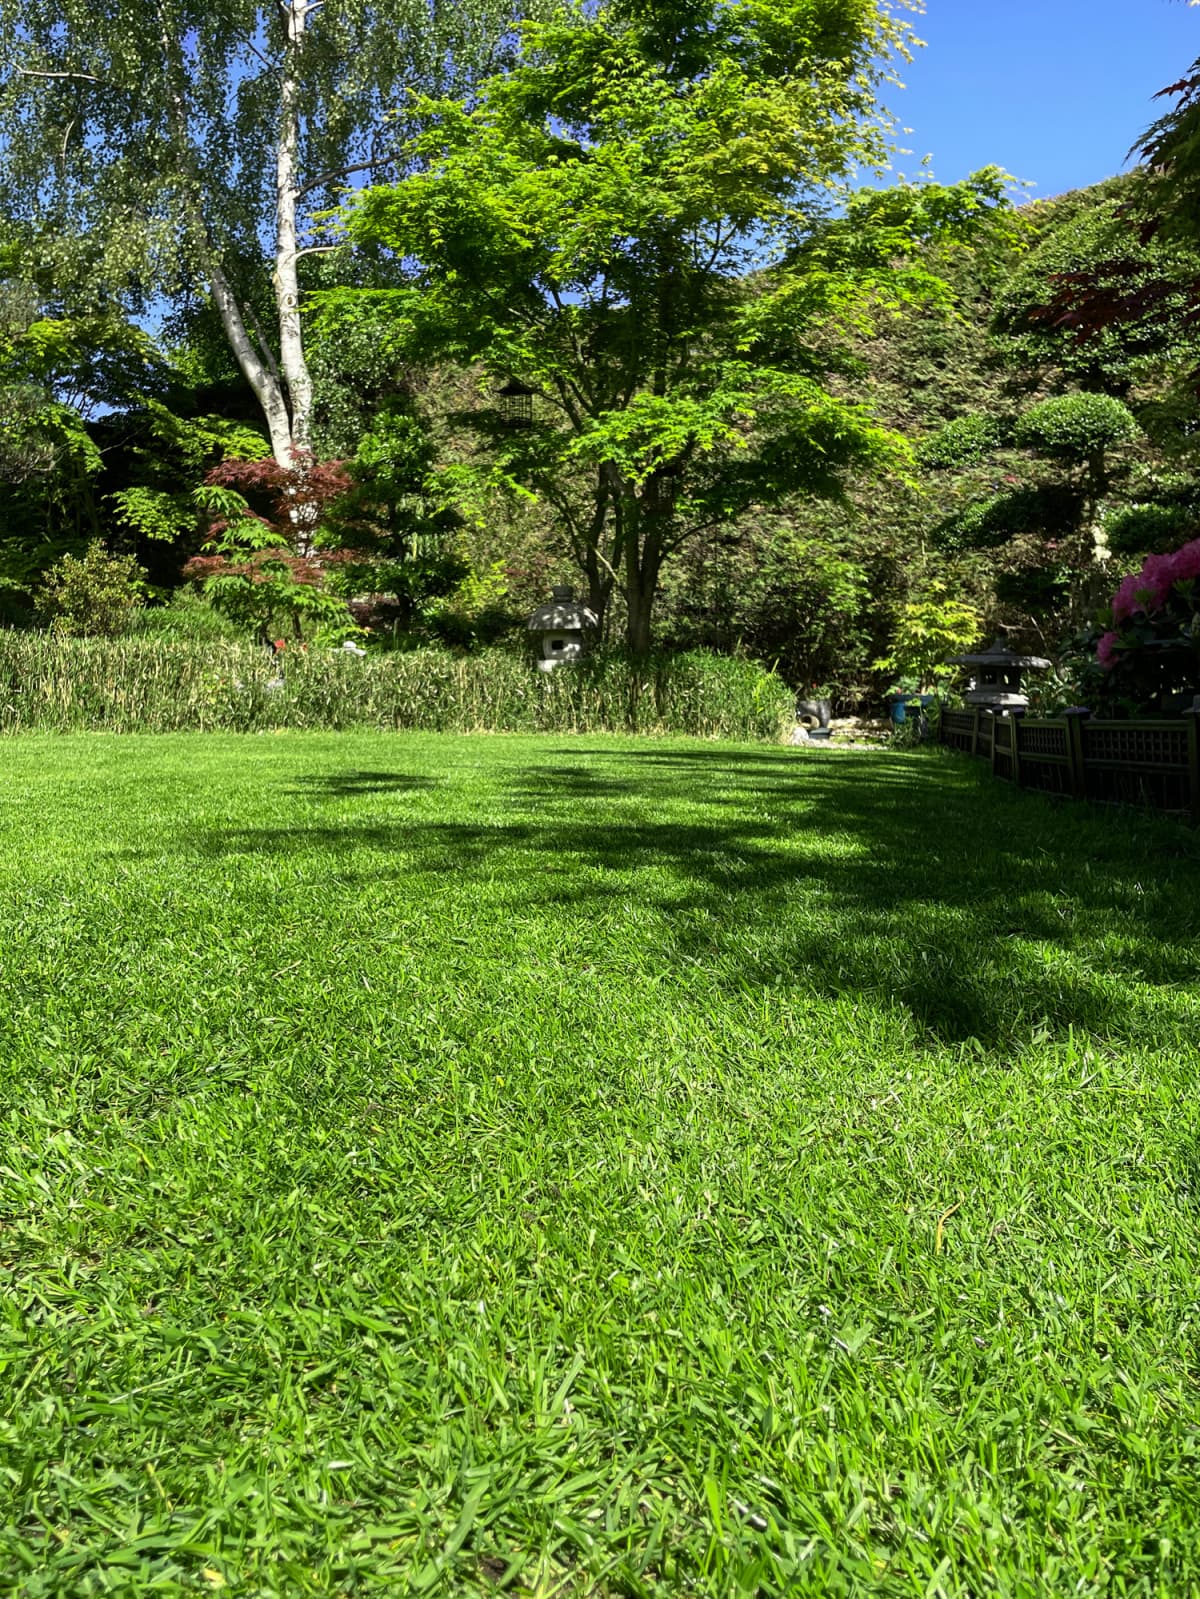 A rejuvenated lawn with lush, green grass